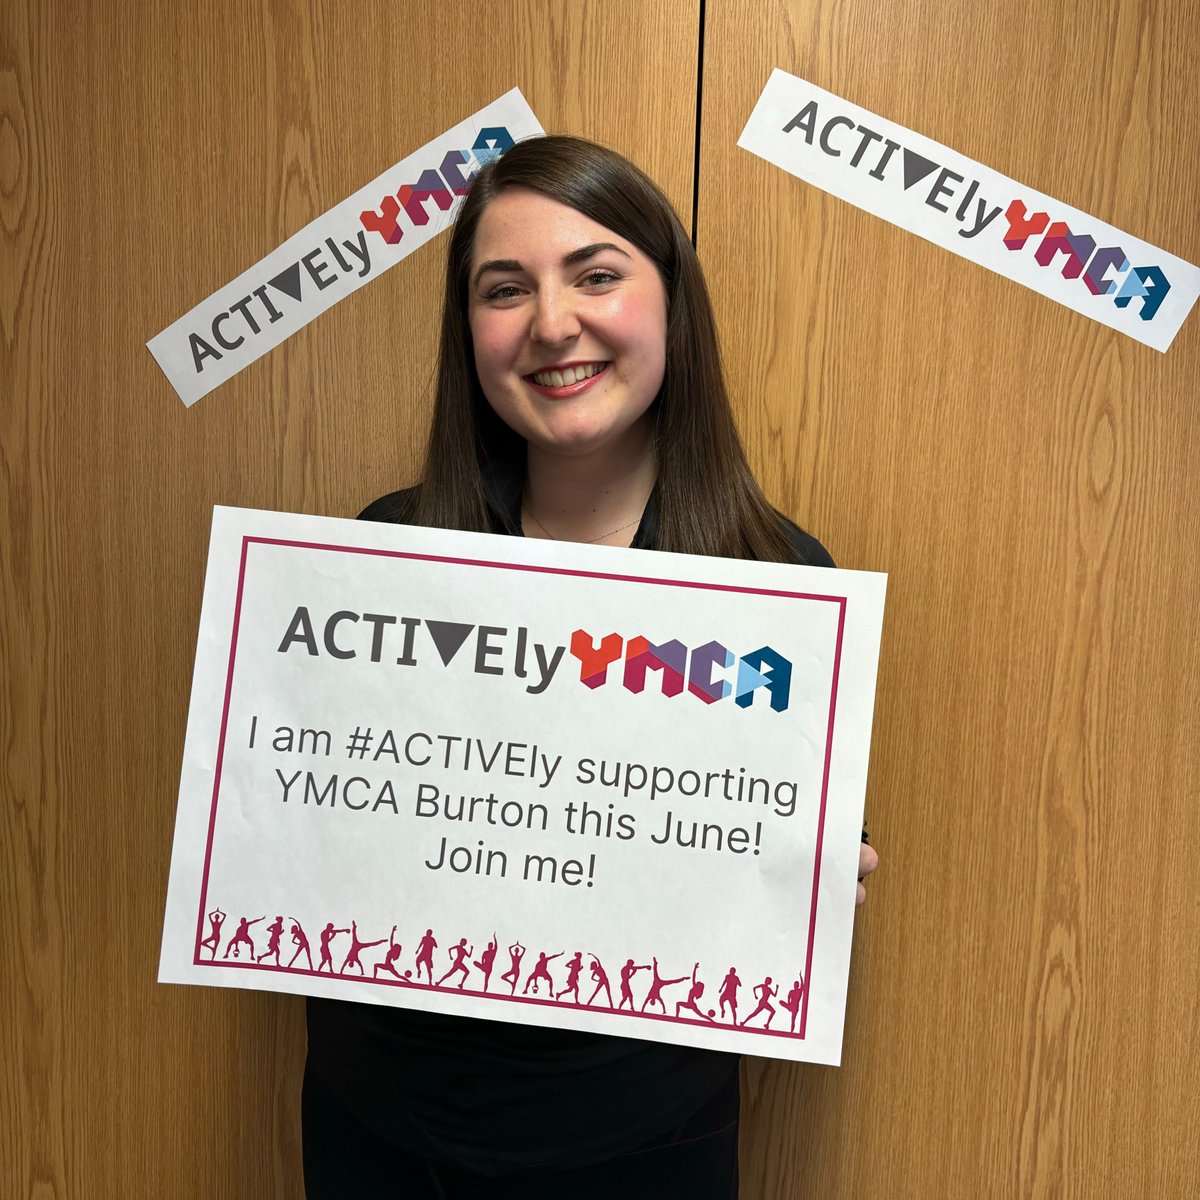 Do something your future self will thank you for and ACTIVEly support YMCA Burton next month! Join us on your own, with family, friends or colleagues and complete 50 miles within 30 days to help your local community. Visit: burtonymca.org/activelyymca/ for more details